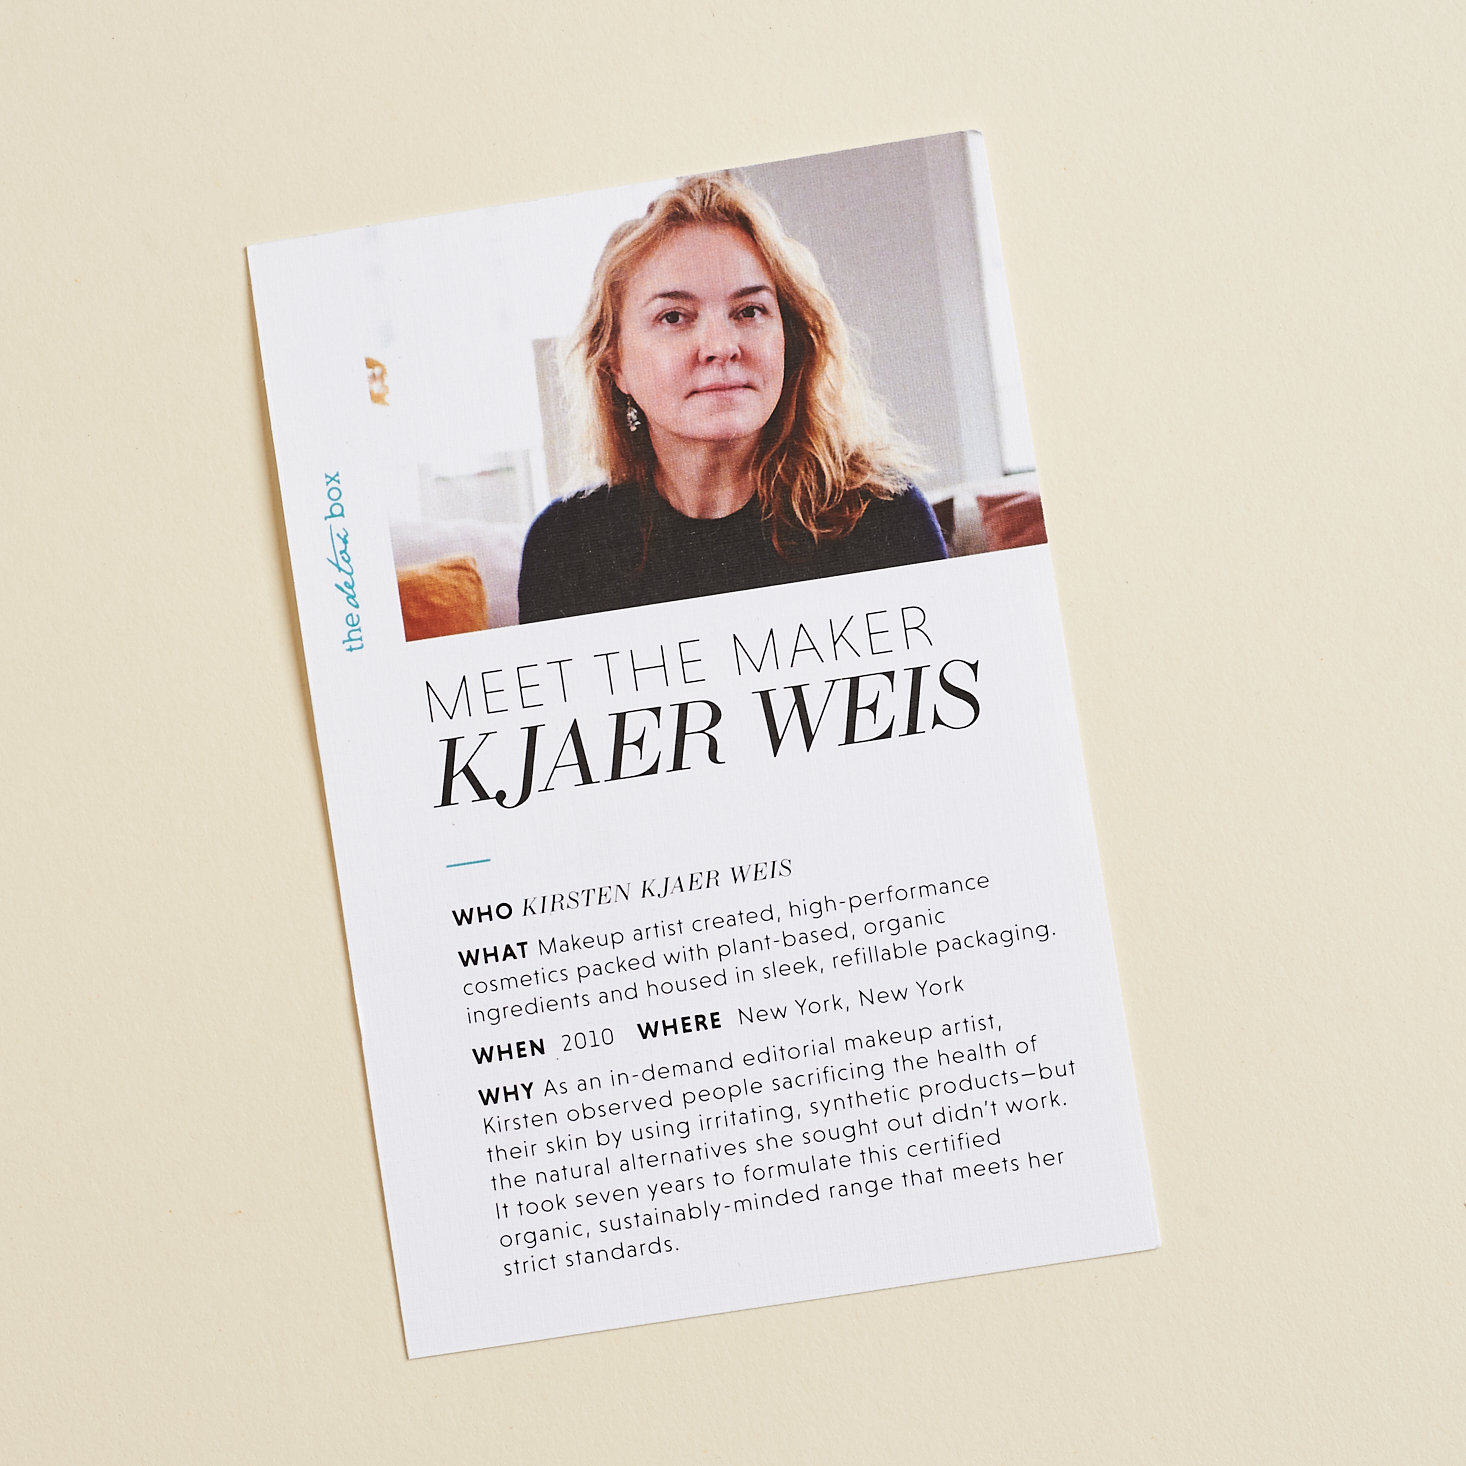 info card with Kjaer Weis stats